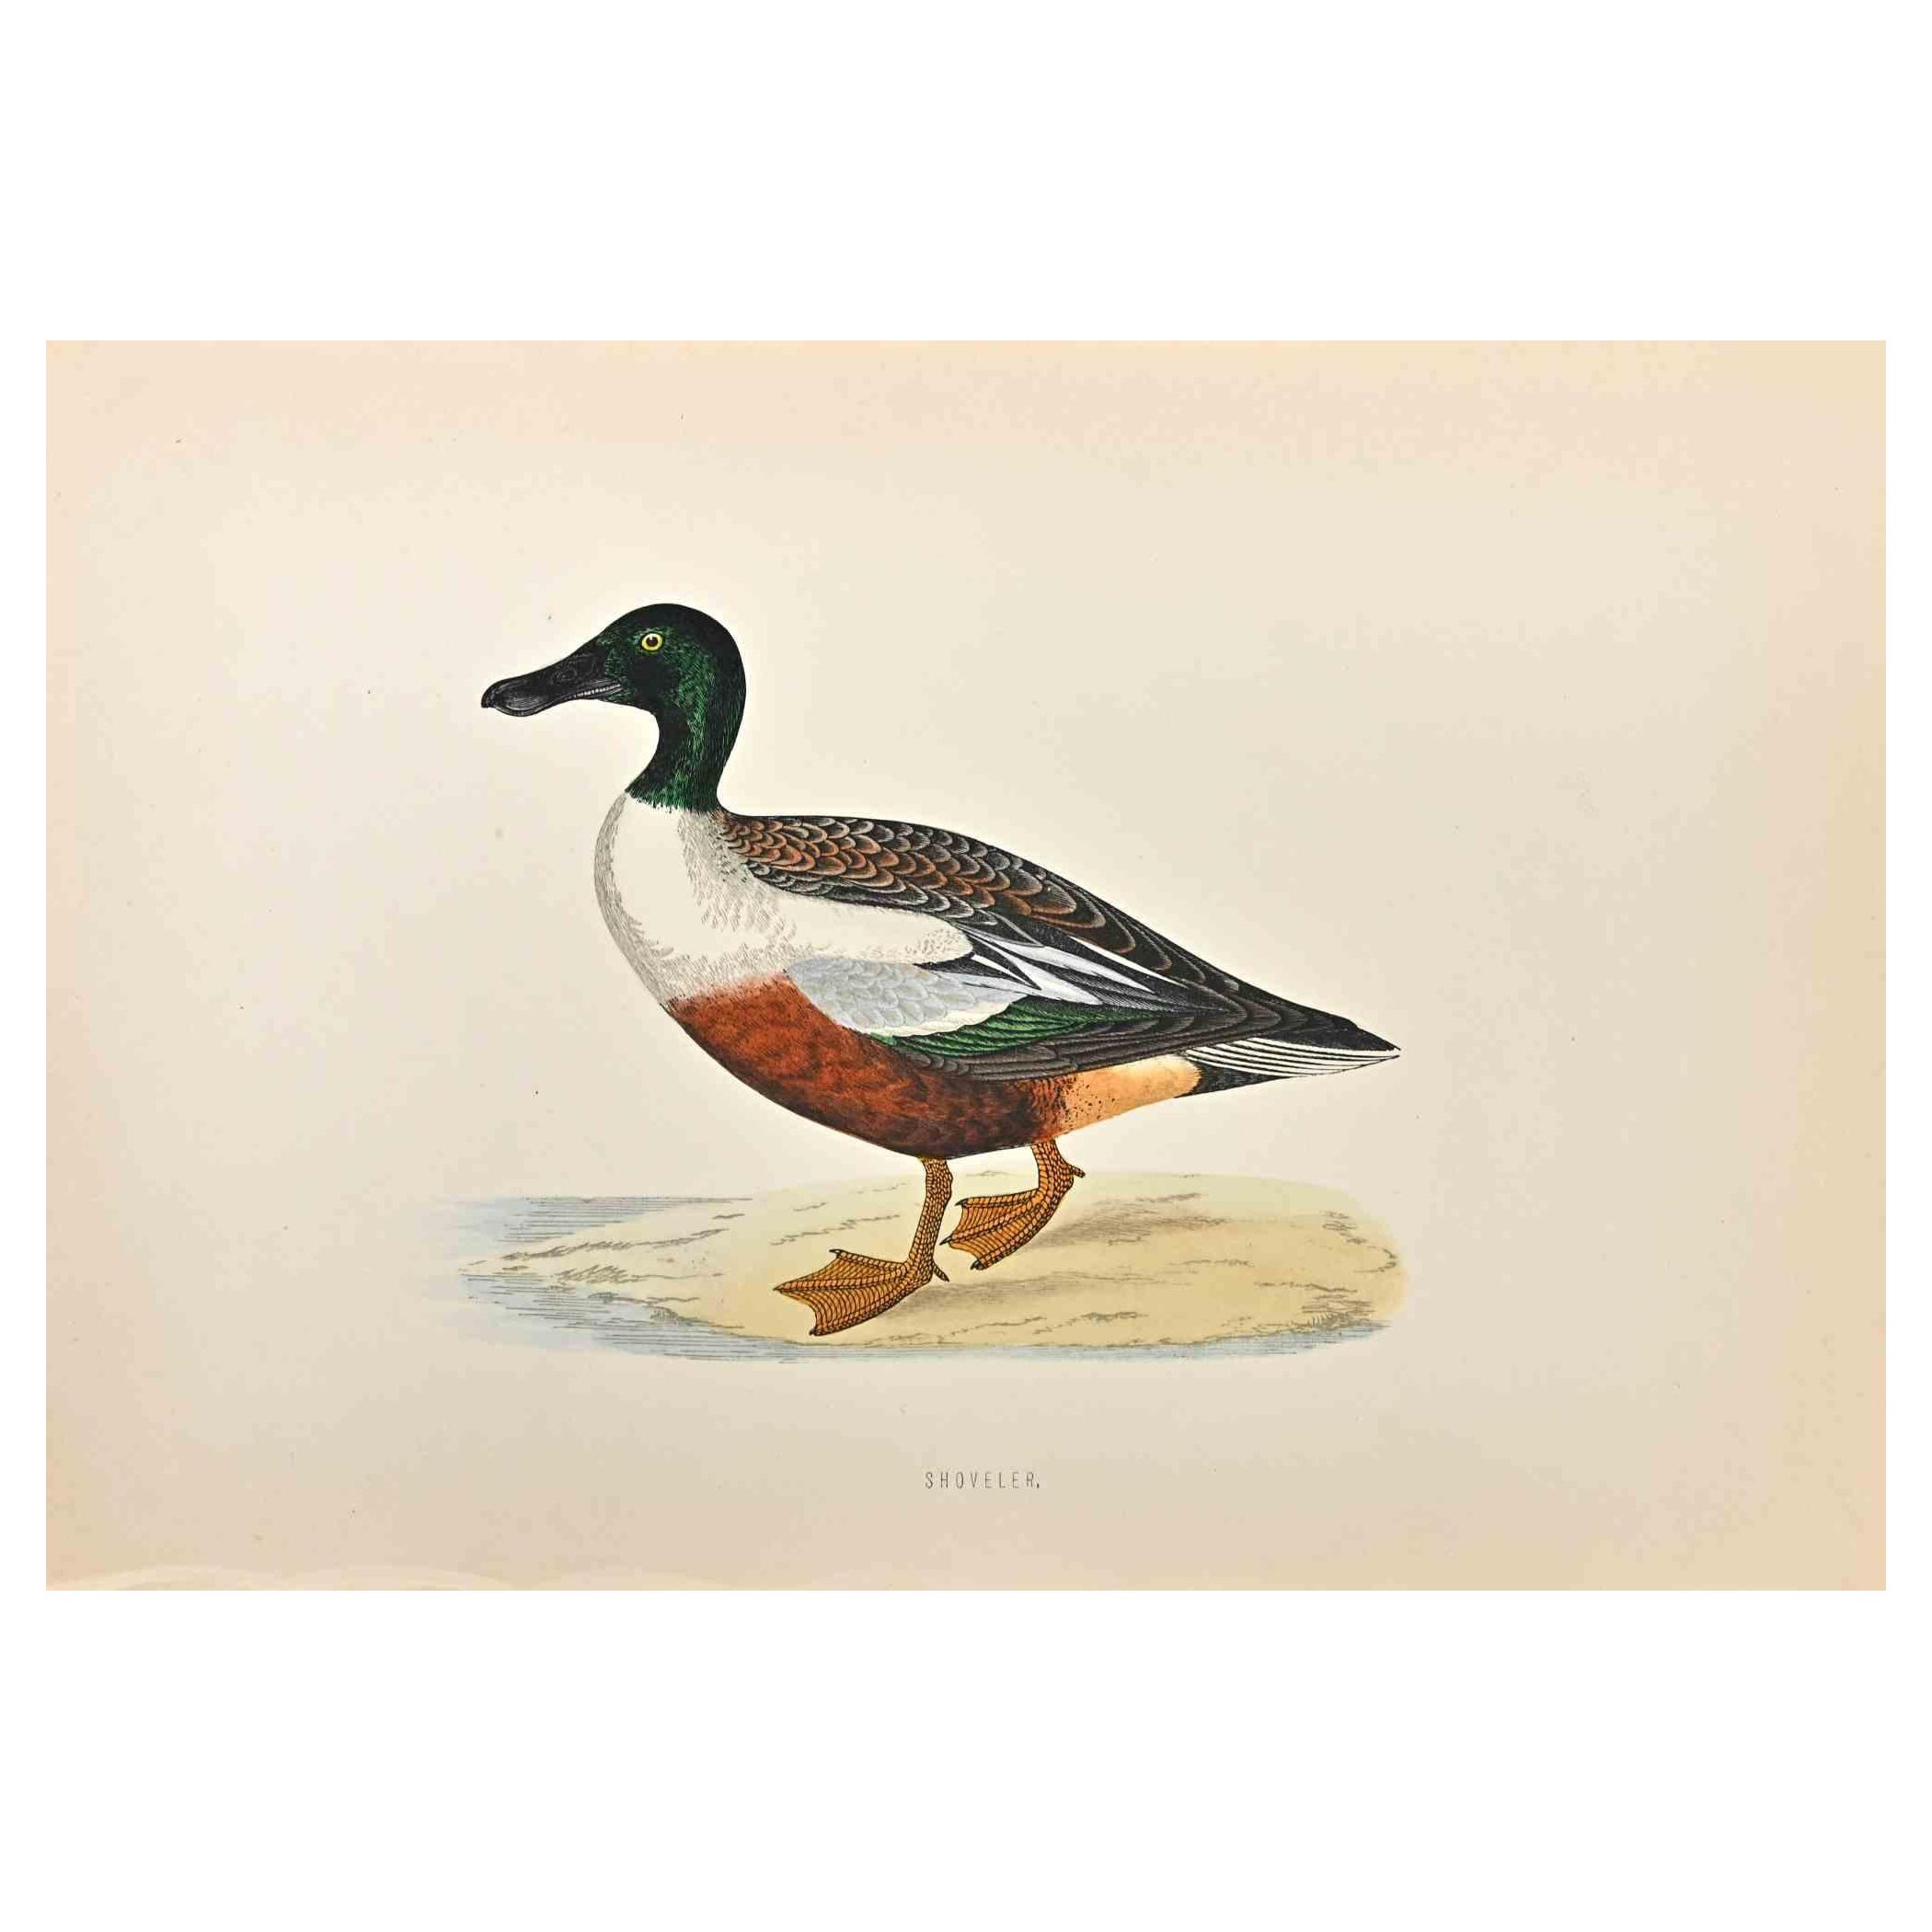 Shoveler  is a modern artwork realized in 1870 by the British artist Alexander Francis Lydon (1836-1917) . 

Woodcut print, hand colored, published by London, Bell & Sons, 1870.  Name of the bird printed in plate. This work is part of a print suite